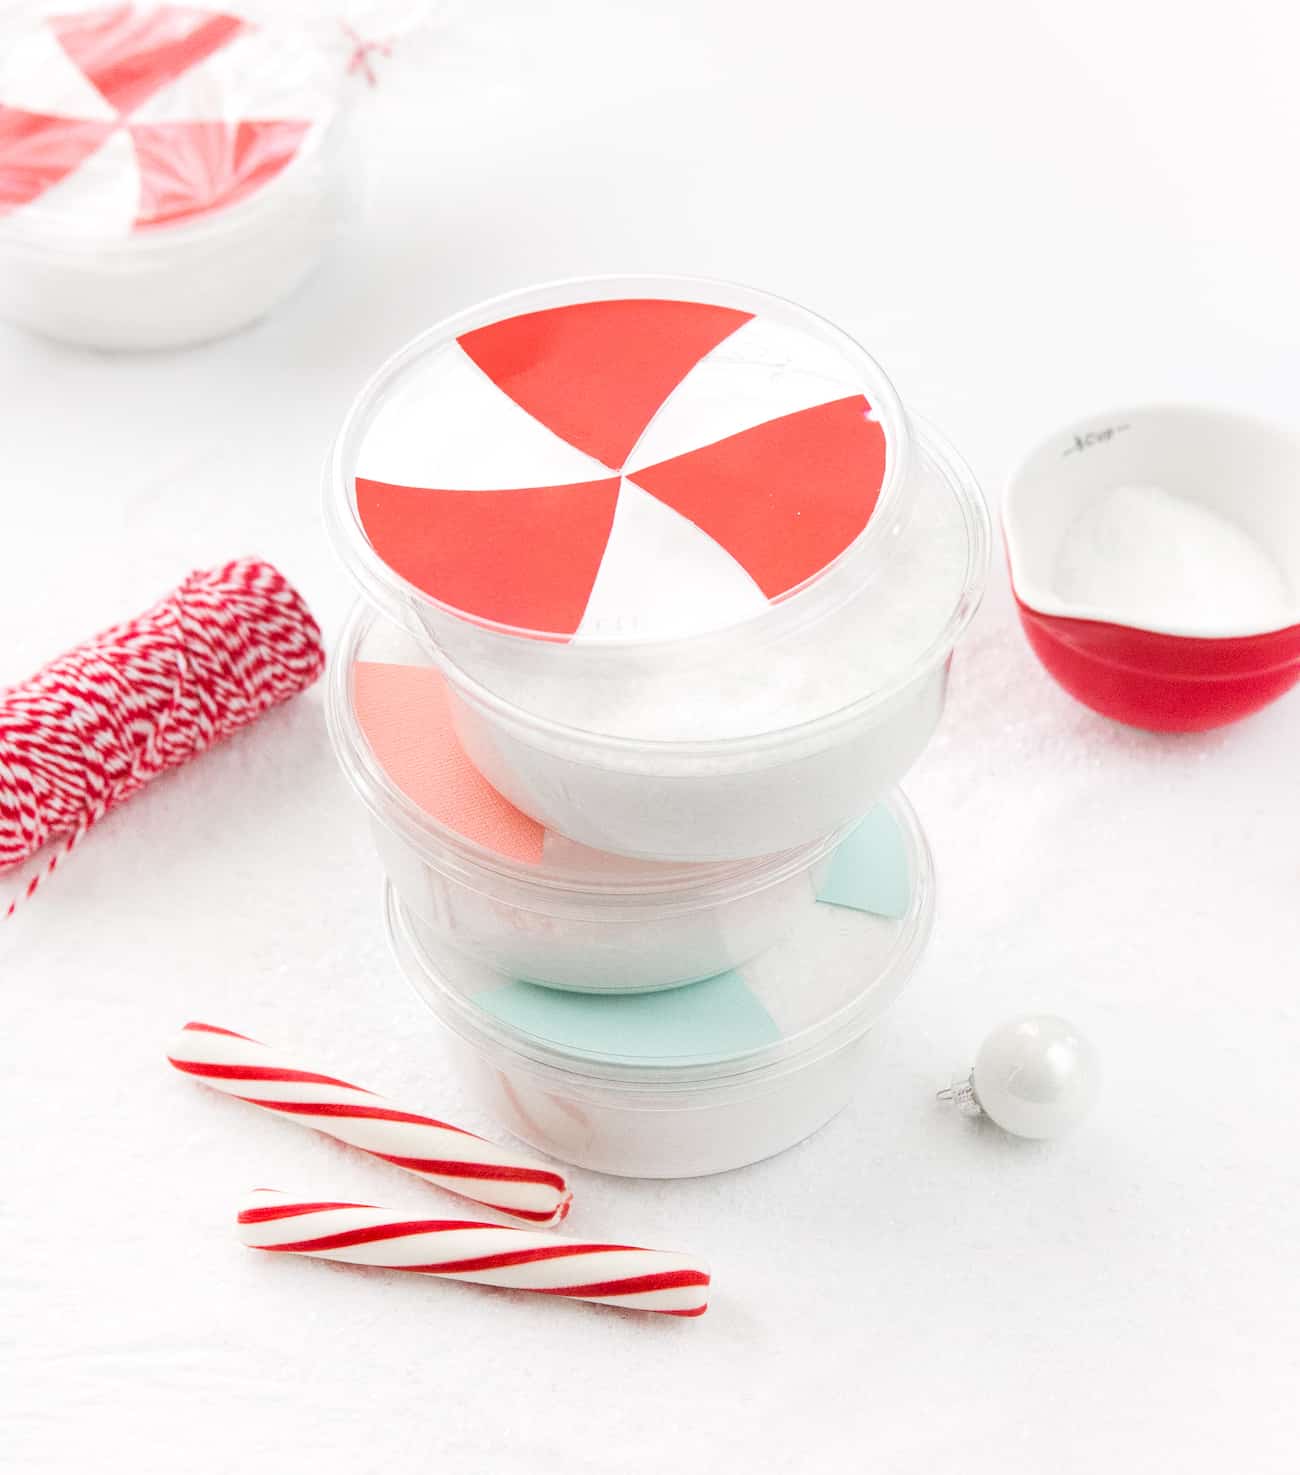 Containers of peppermint DIY bath salt decorated as peppermint candy.